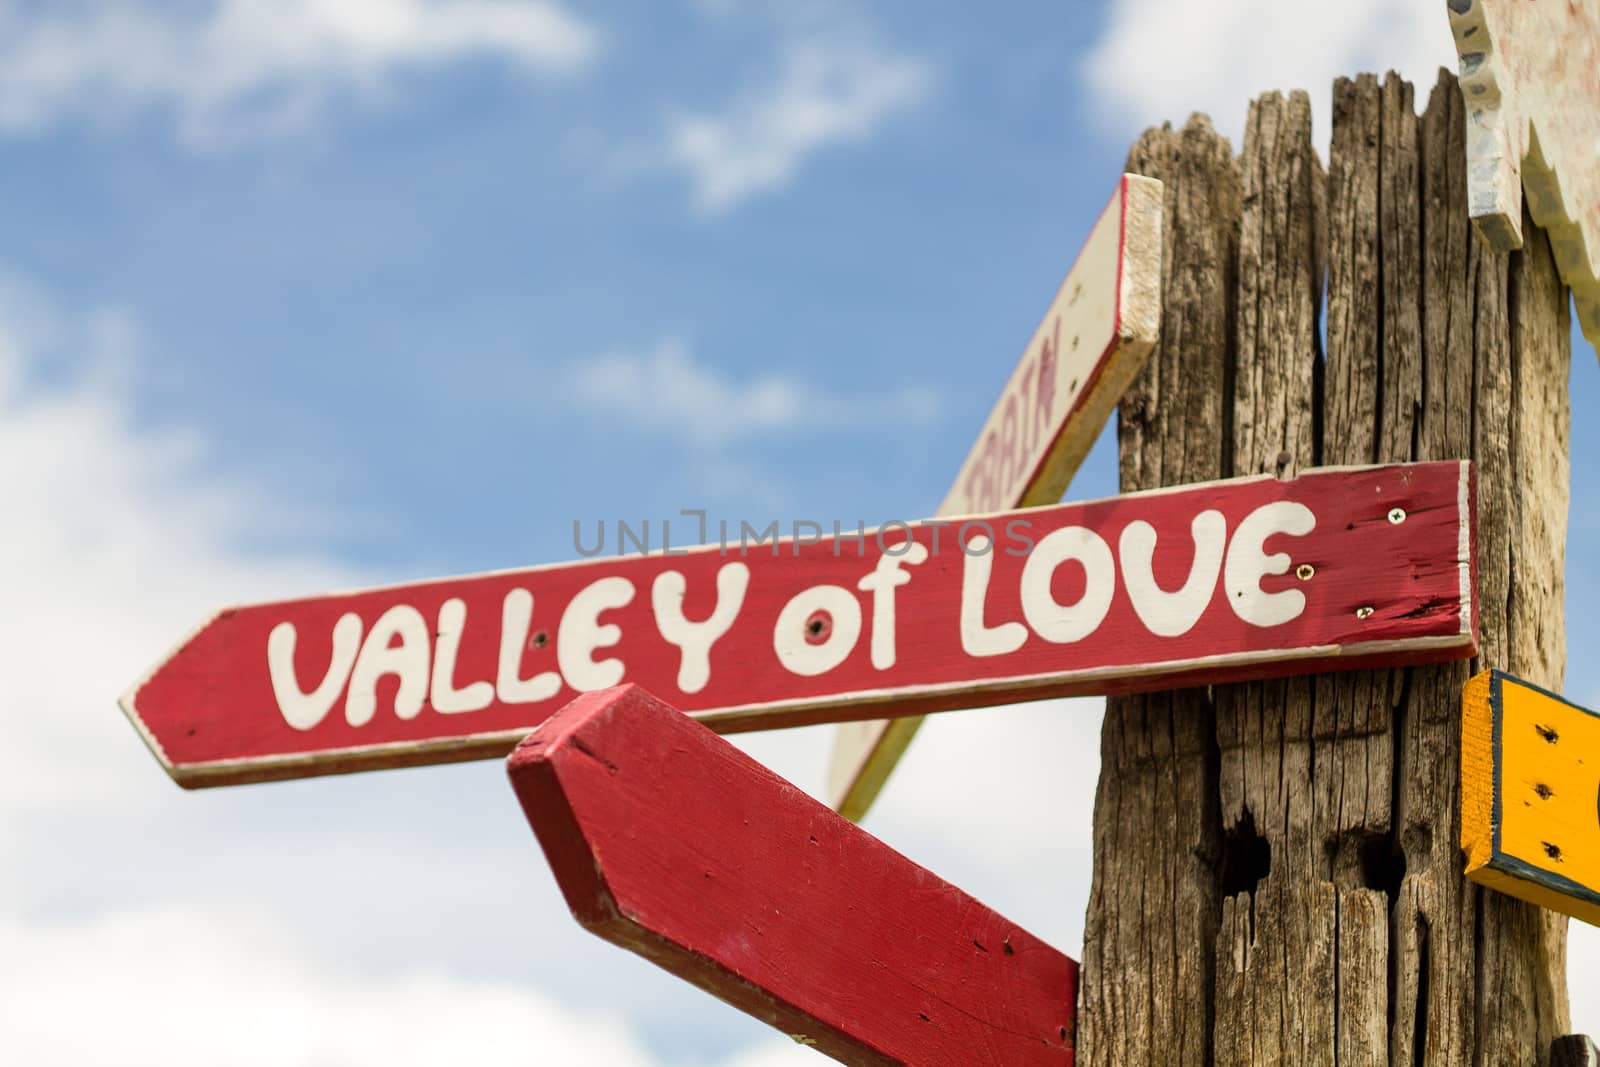 valley of love sign on wood pole